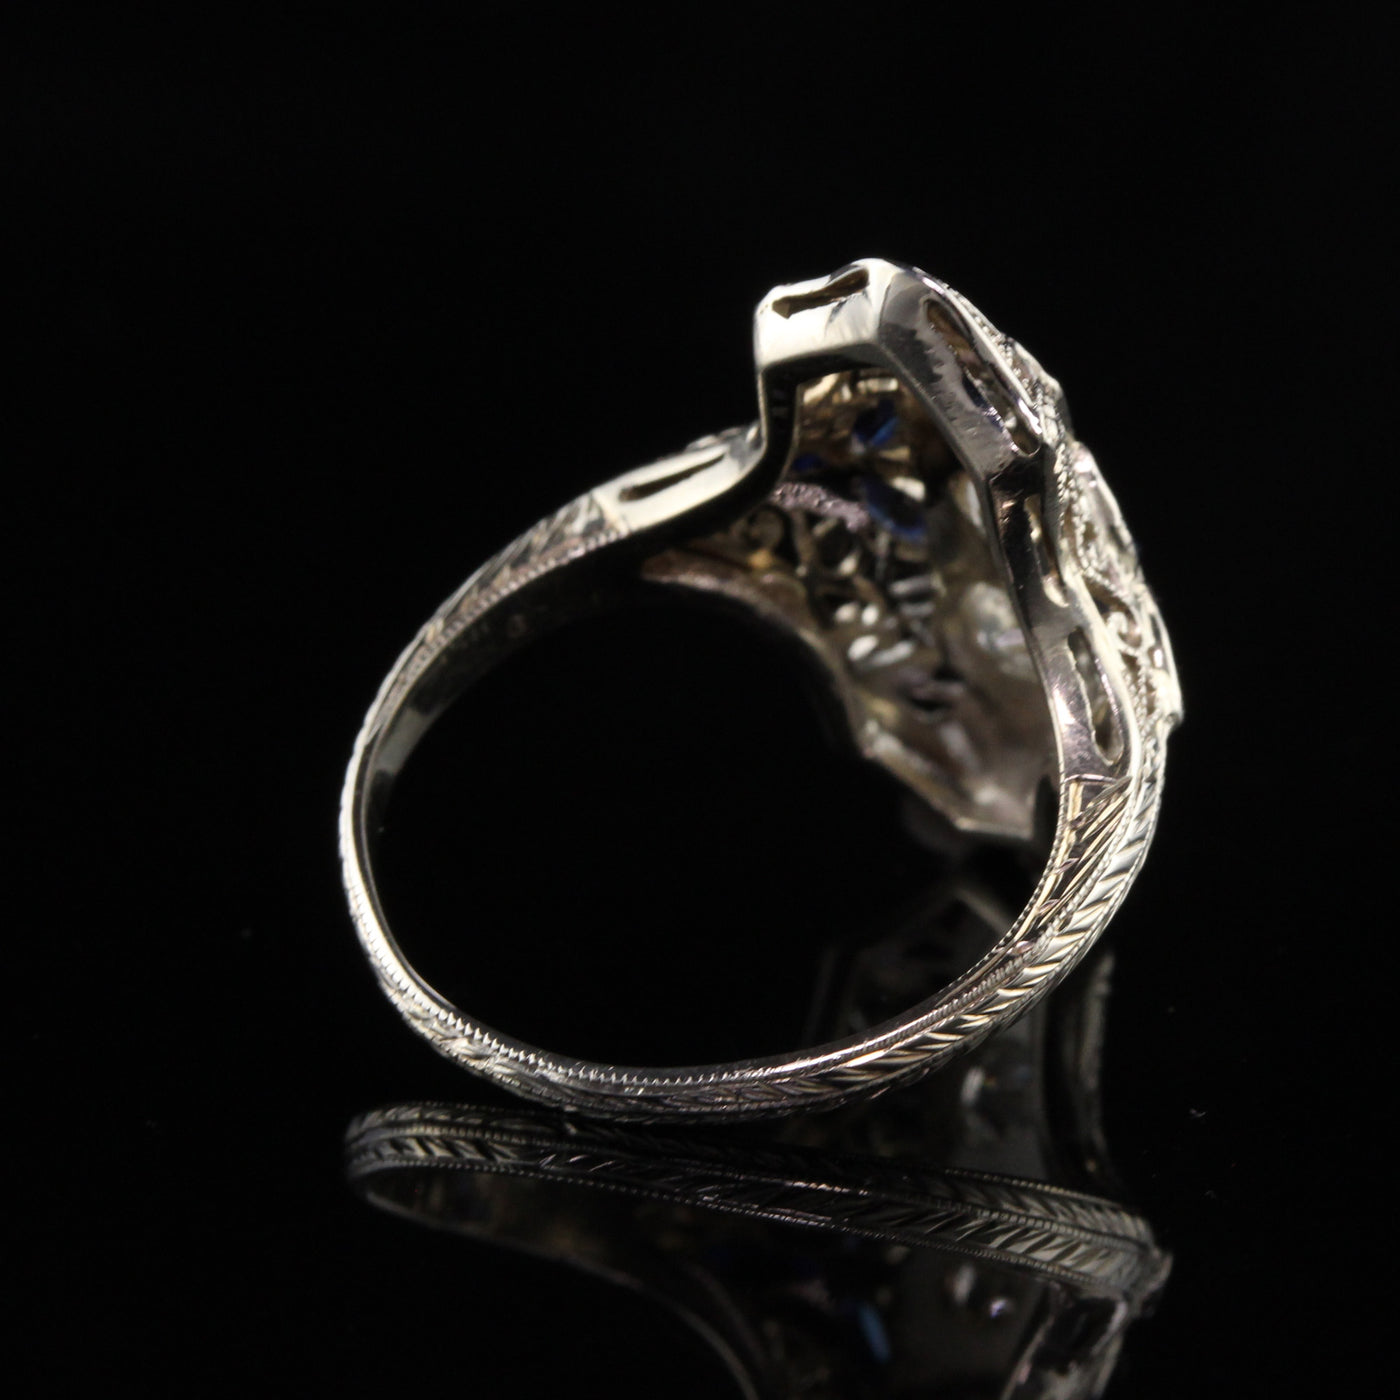 Antique Art Deco 18K White Gold Old Mine Cut Diamond and Sapphire Shield Ring